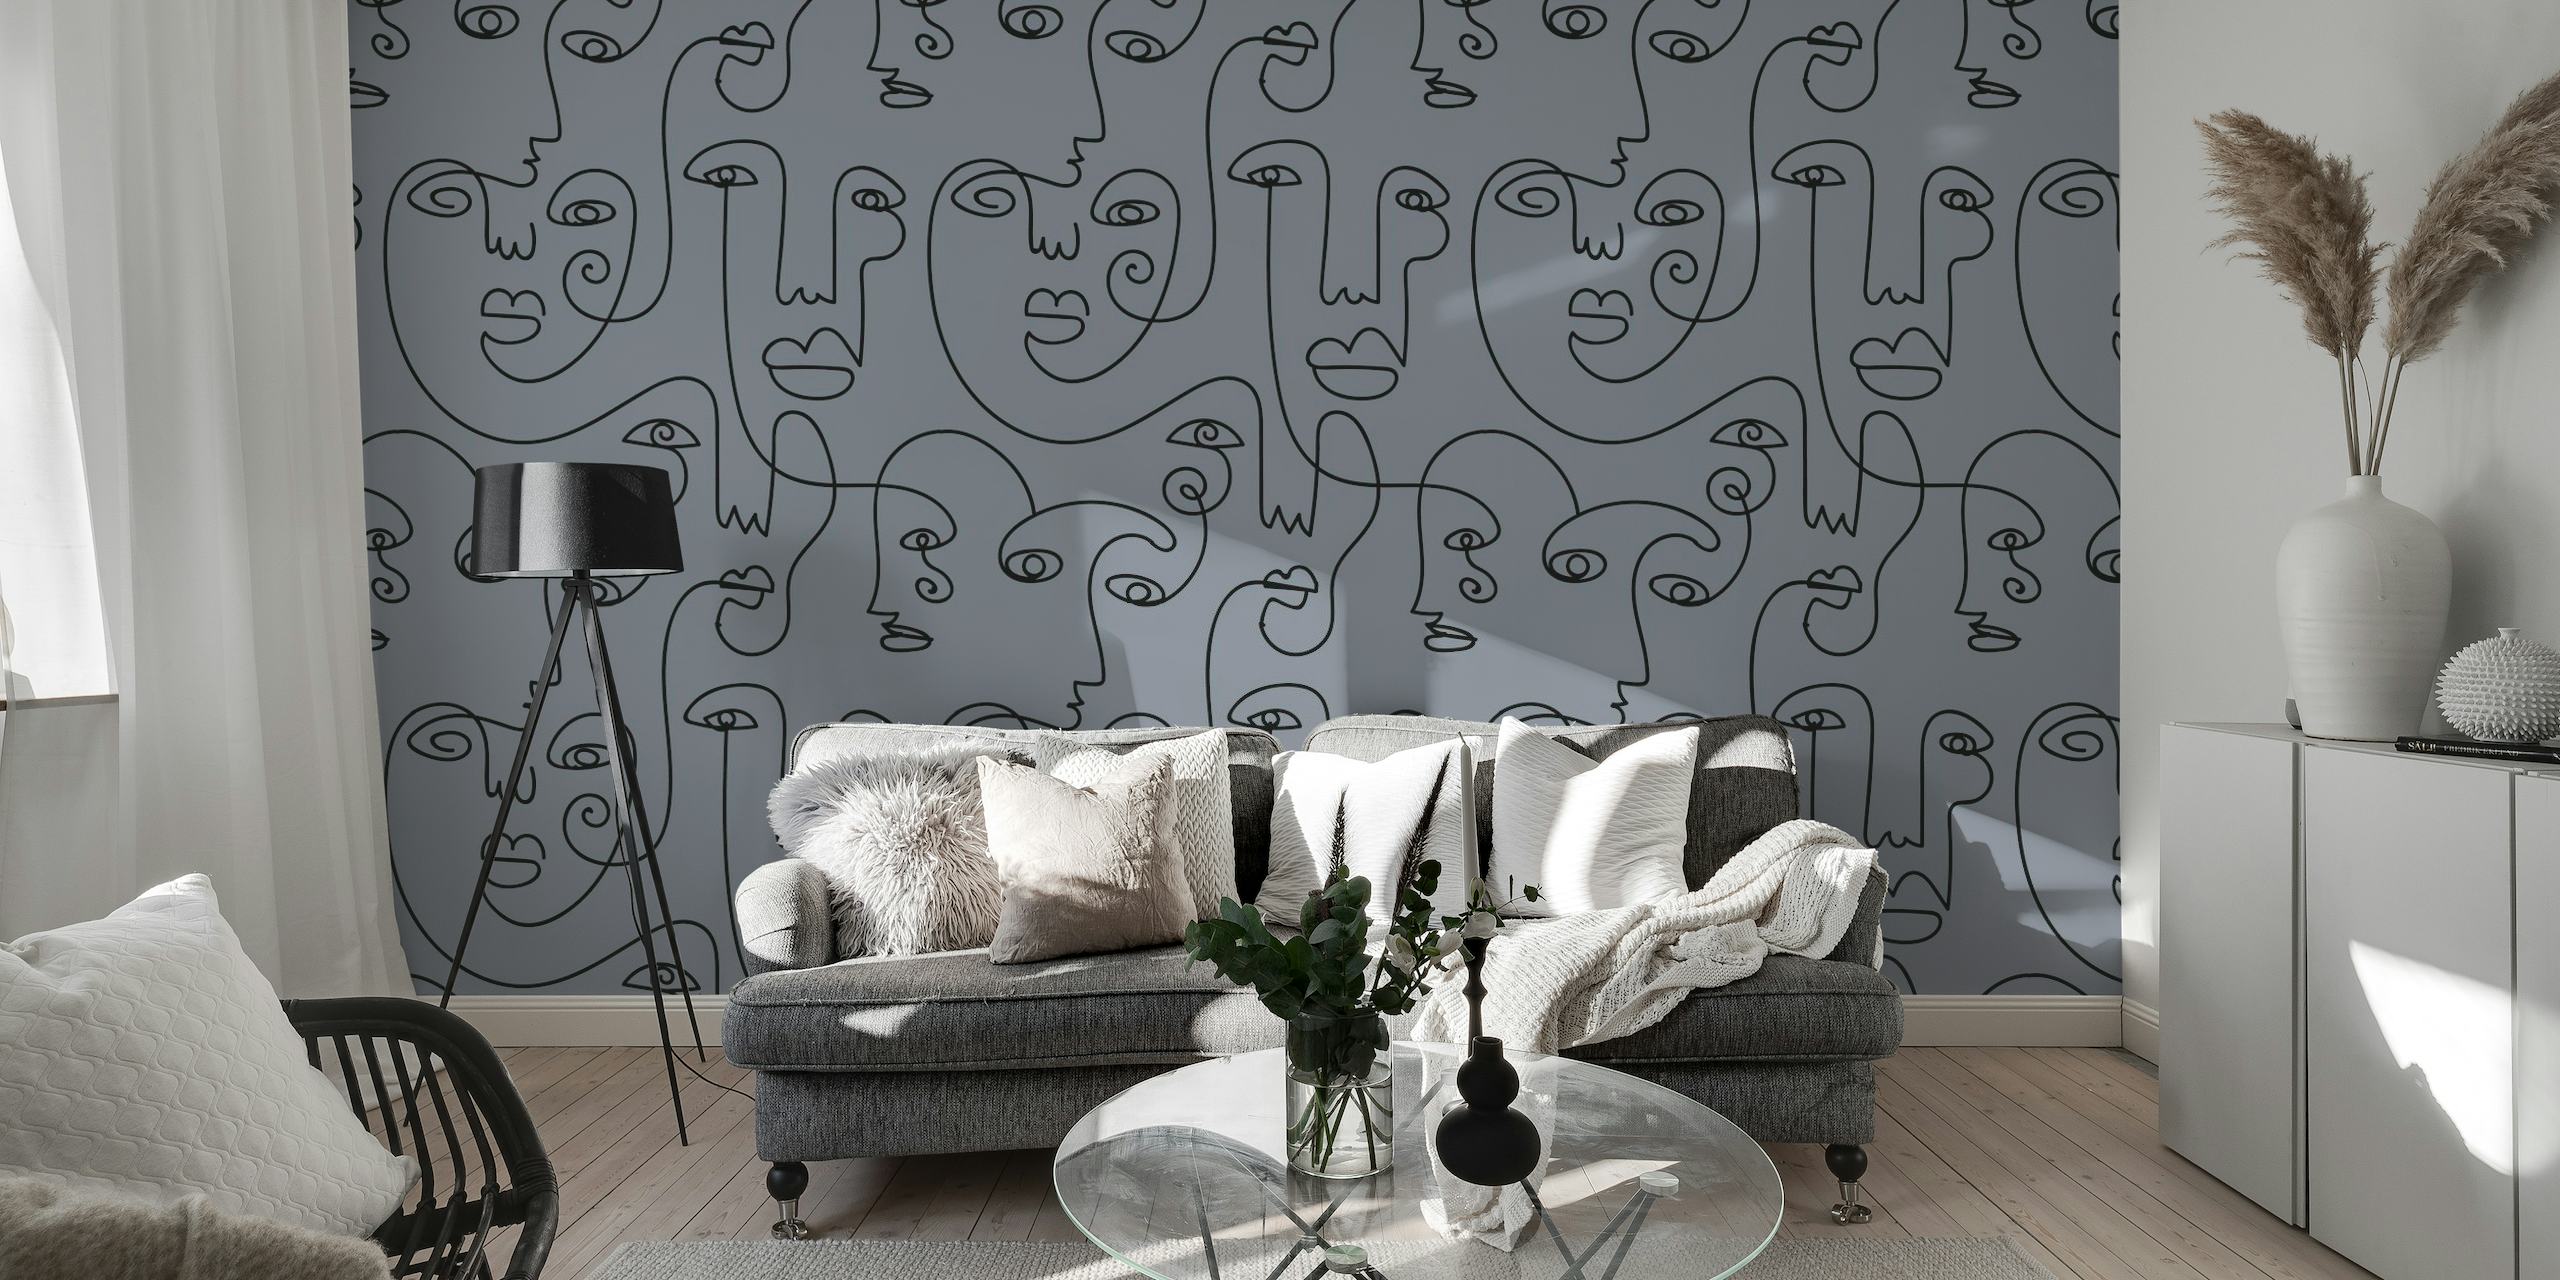 Gray abstract Picasso-inspired faces wall mural for modern interior decoration